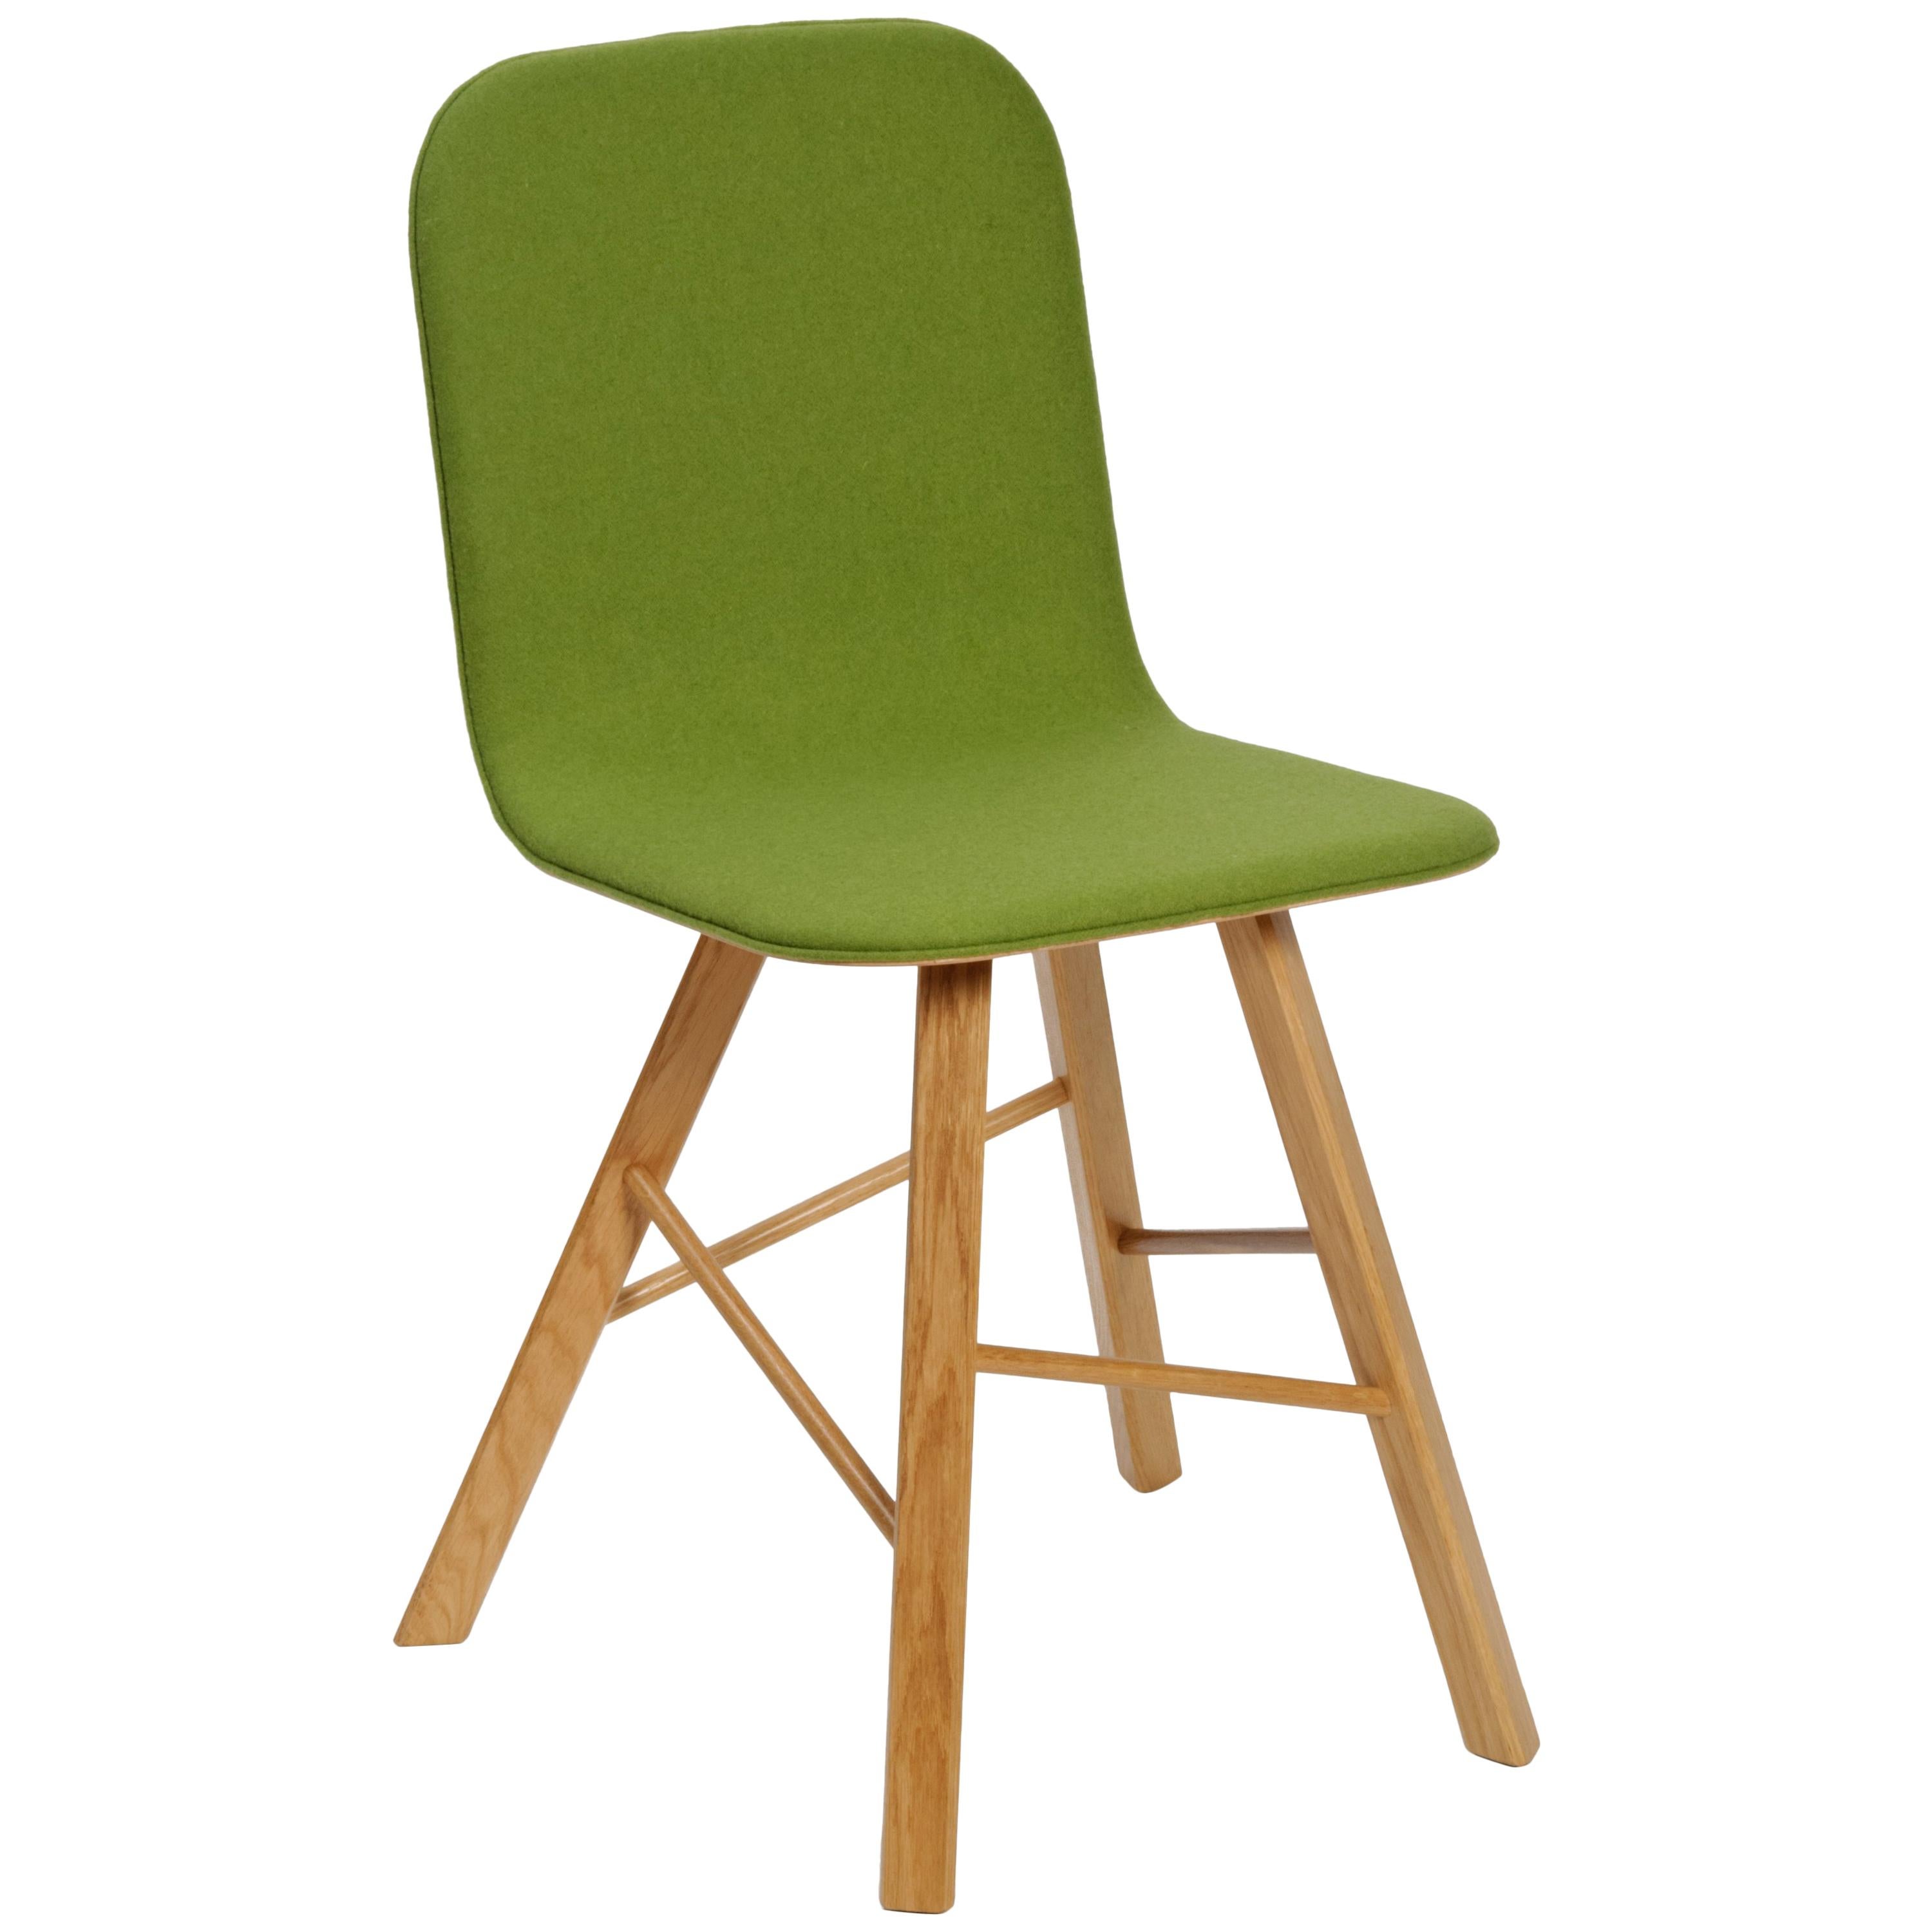 Tria Simple Chair Oak and Green Upholstered Seat by Colé, Minimalist